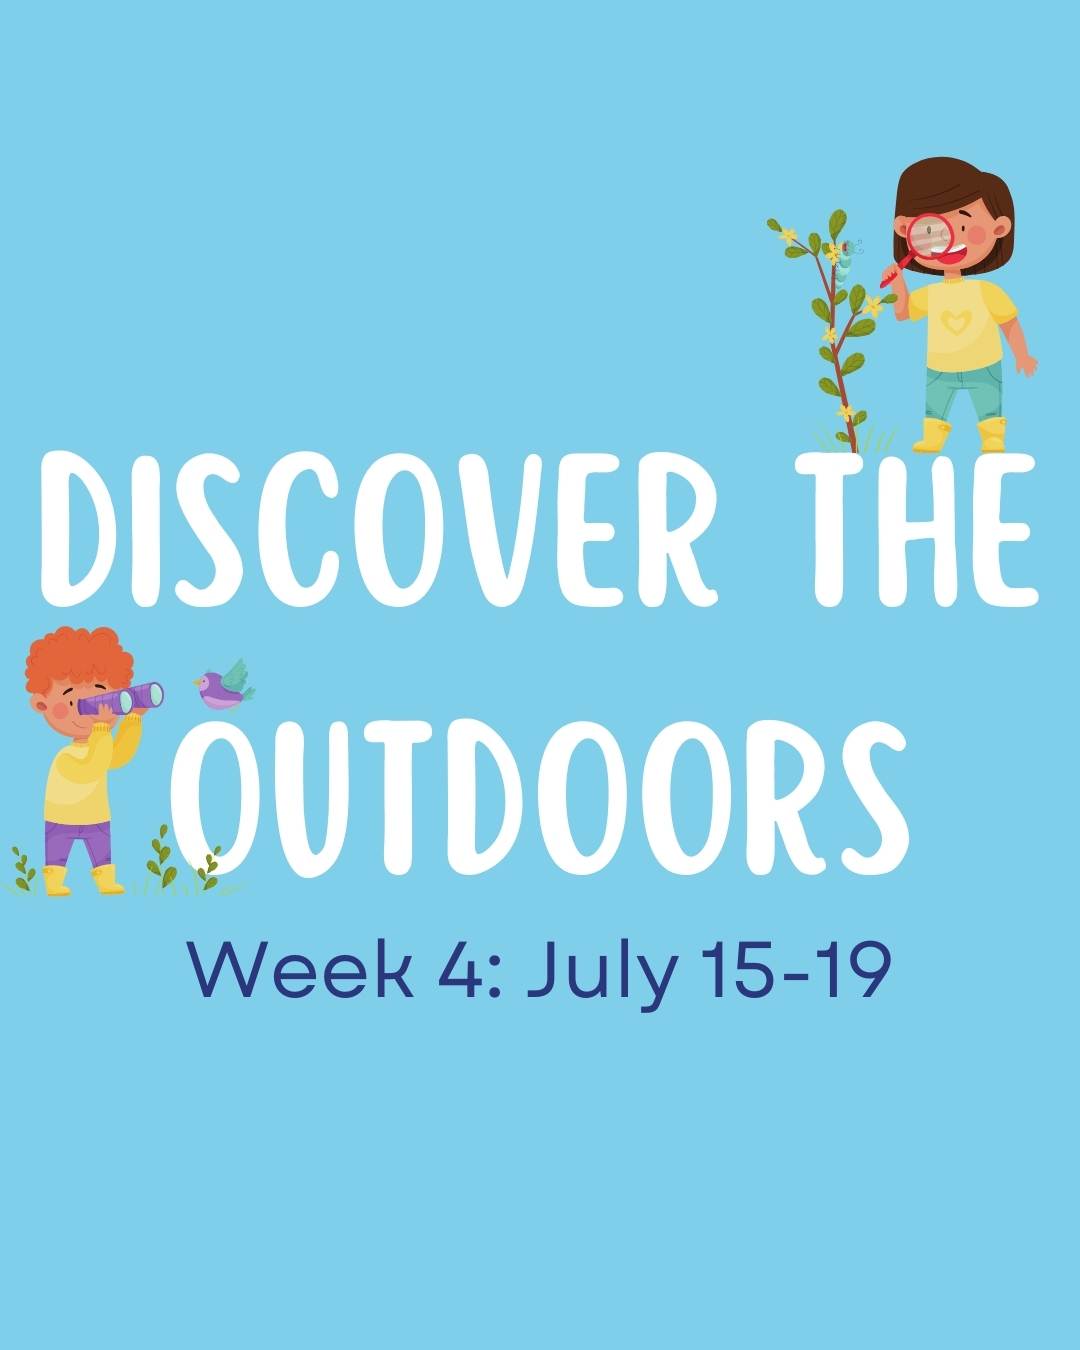 DISCOVER THE OUTDOORS: All Things Within Nature: This week will contain a preselection of outdoor exploration activities that all ages can enjoy!